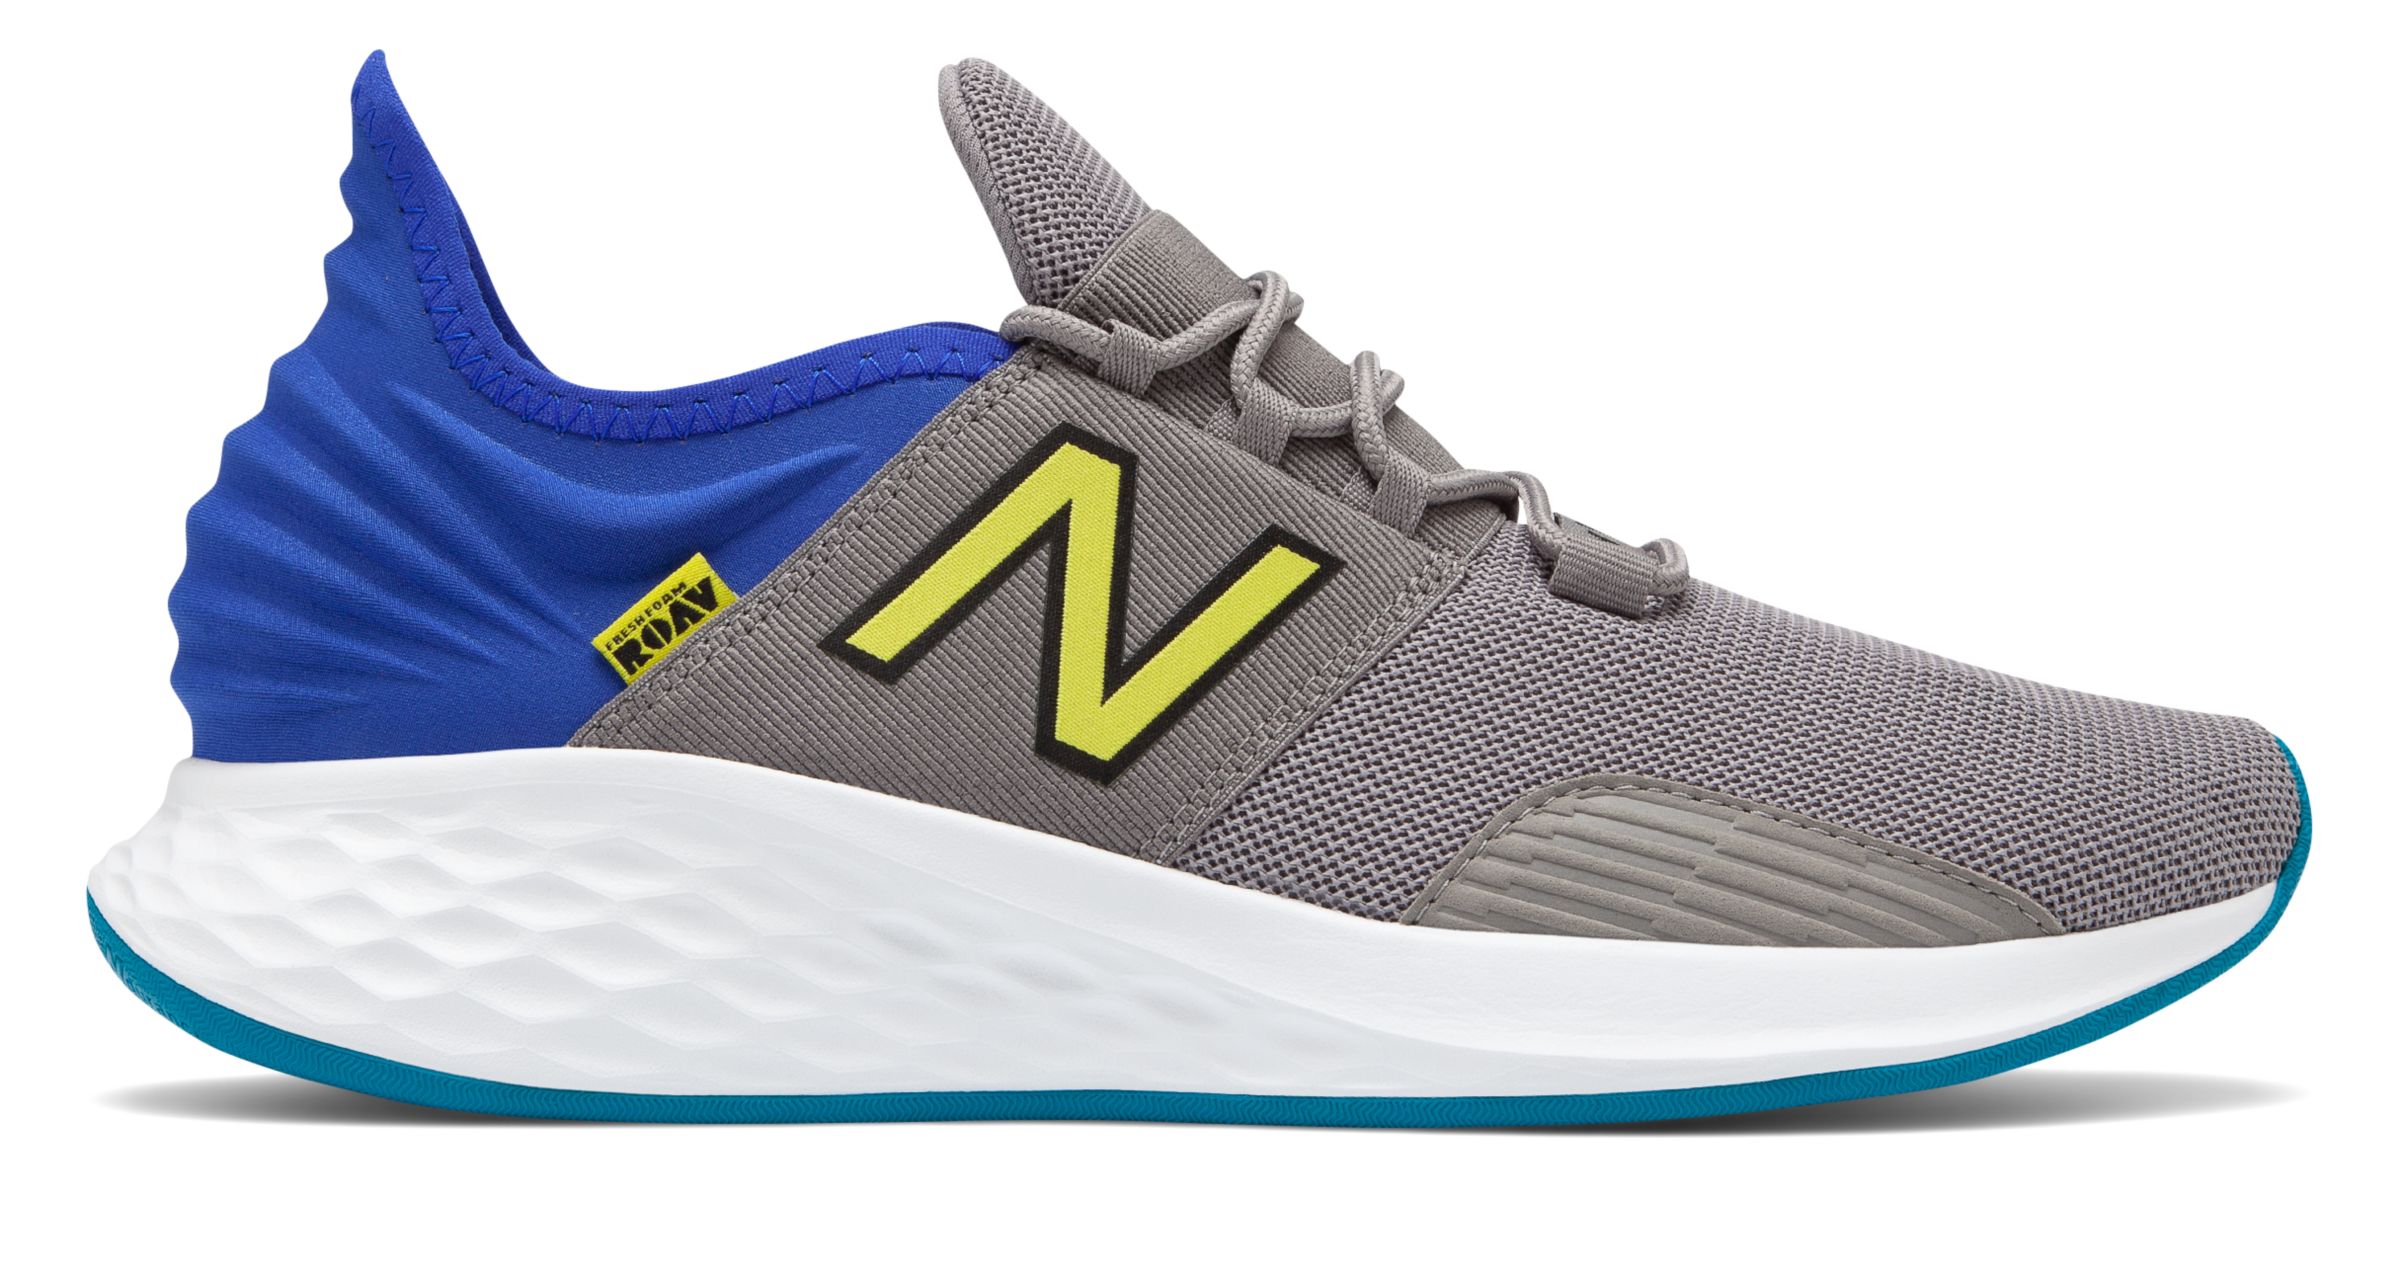 new balance extra wide basketball shoes